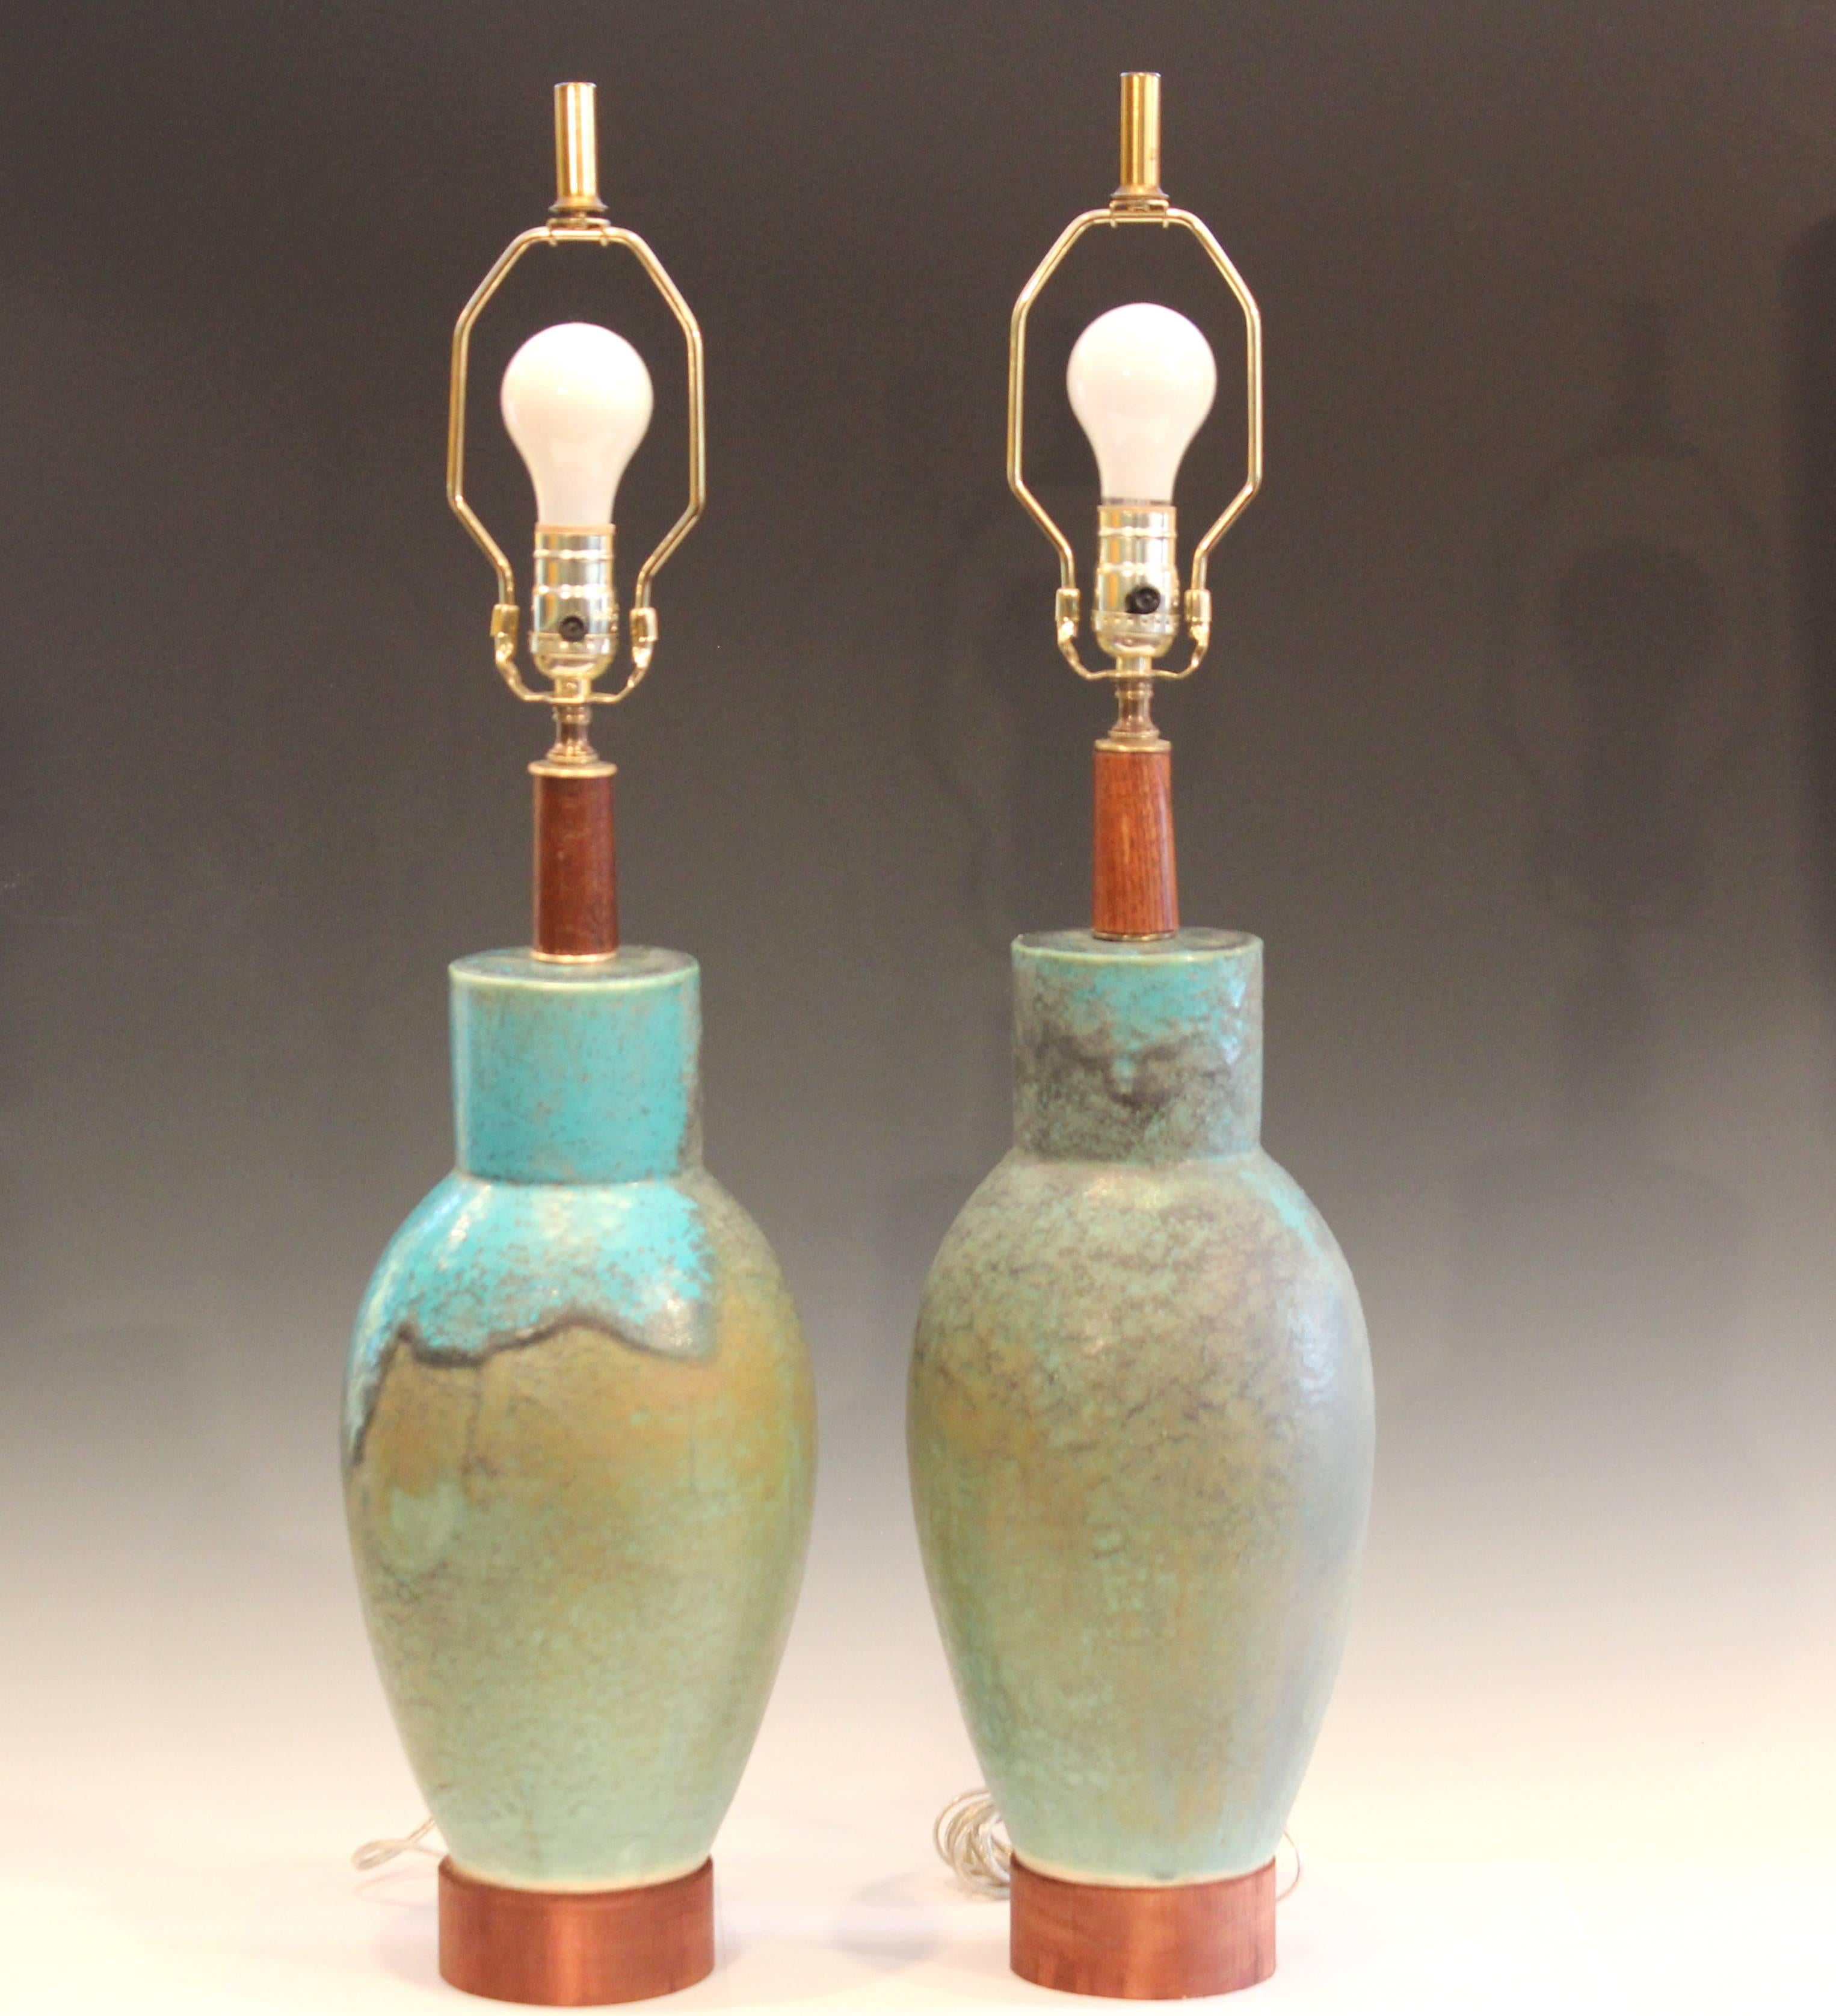 Modern Pair of Midcentury Flambe Crystalline Galloway Glaze Old Japanese Lamps Pottery